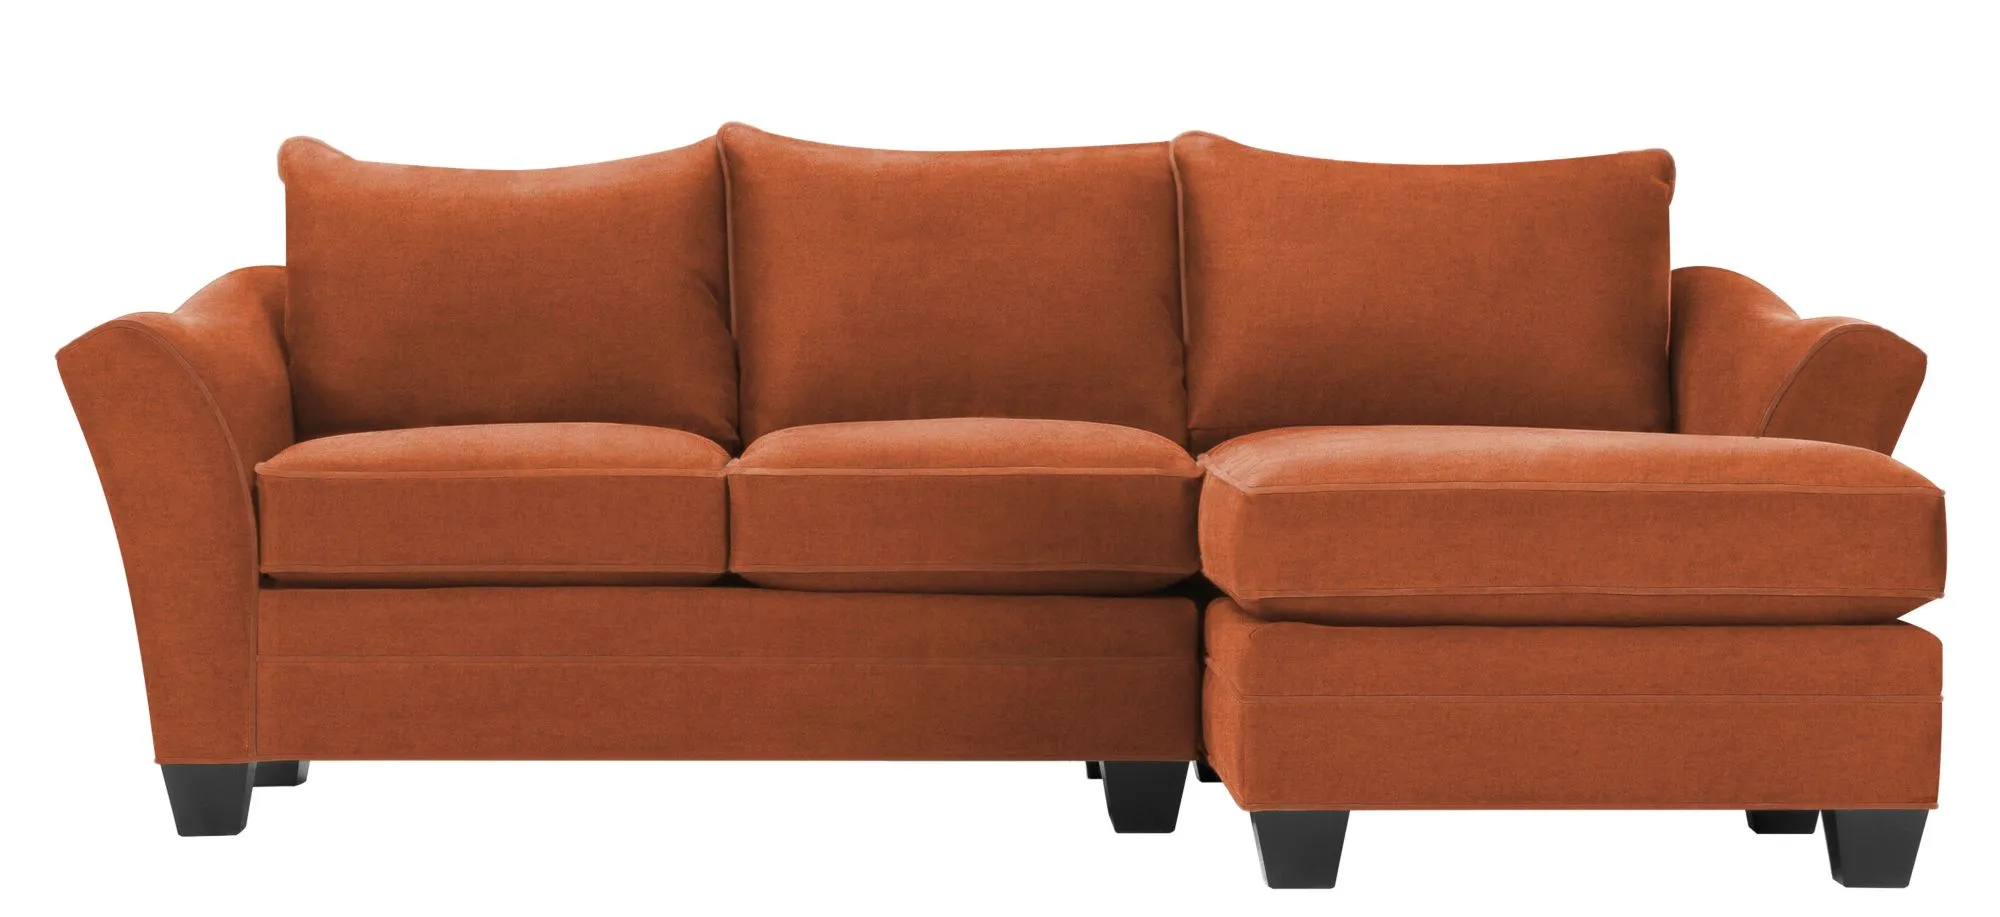 Foresthill 2-pc. Right Hand Chaise Sectional Sofa in Santa Rosa Adobe by H.M. Richards